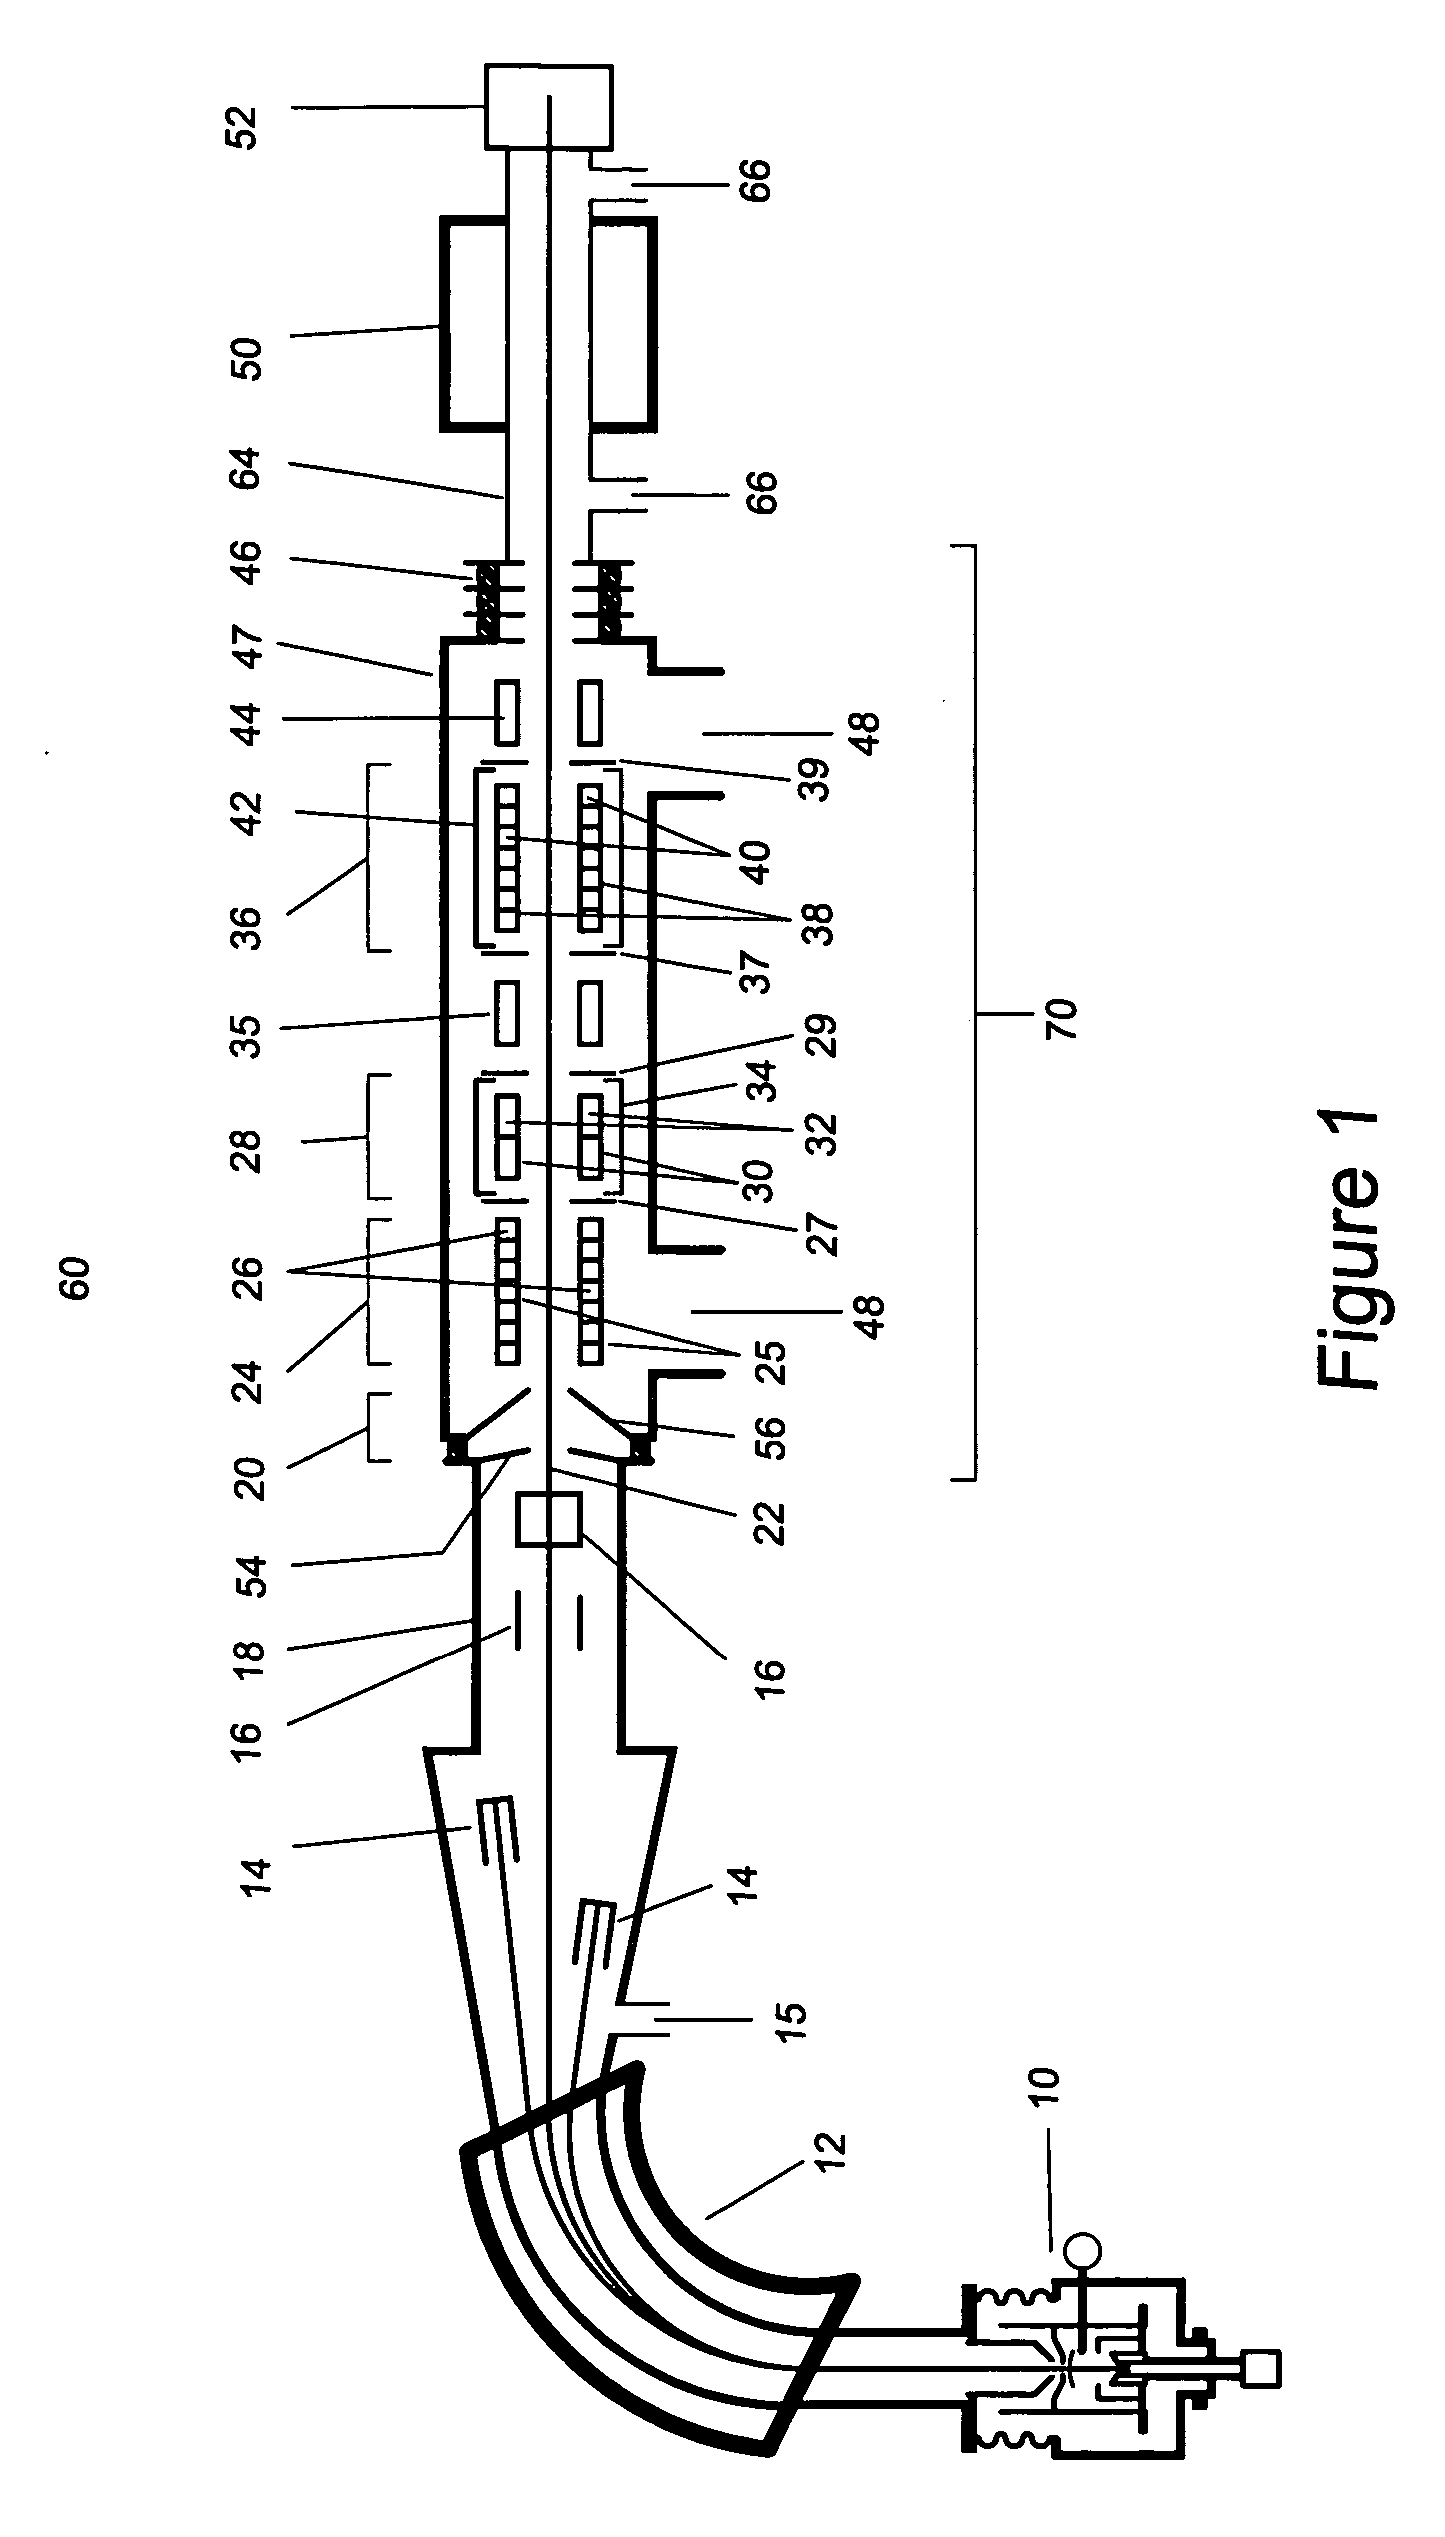 Method and apparatus for separation of isobaric interferences